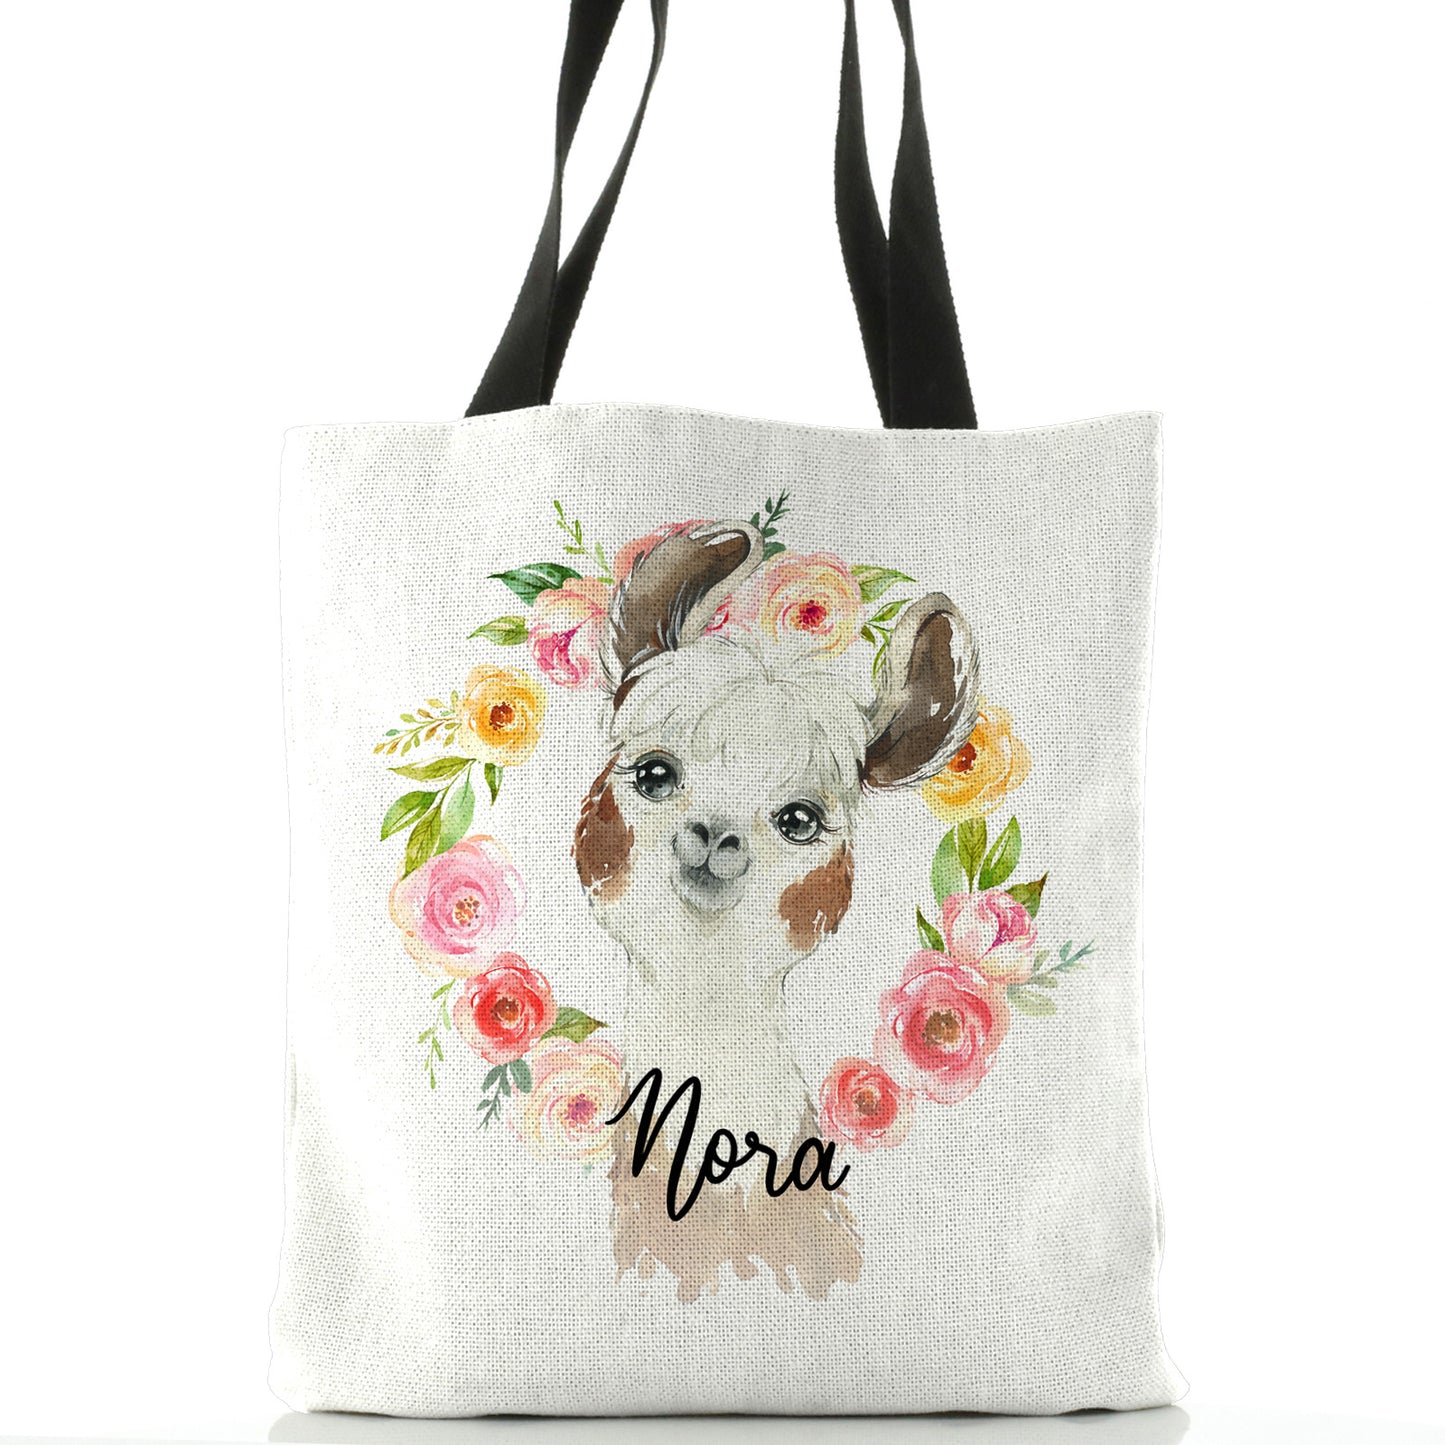 Personalised White Tote Bag with Brown and White Alpaca Multicolour Flower Wreath and Cute Text